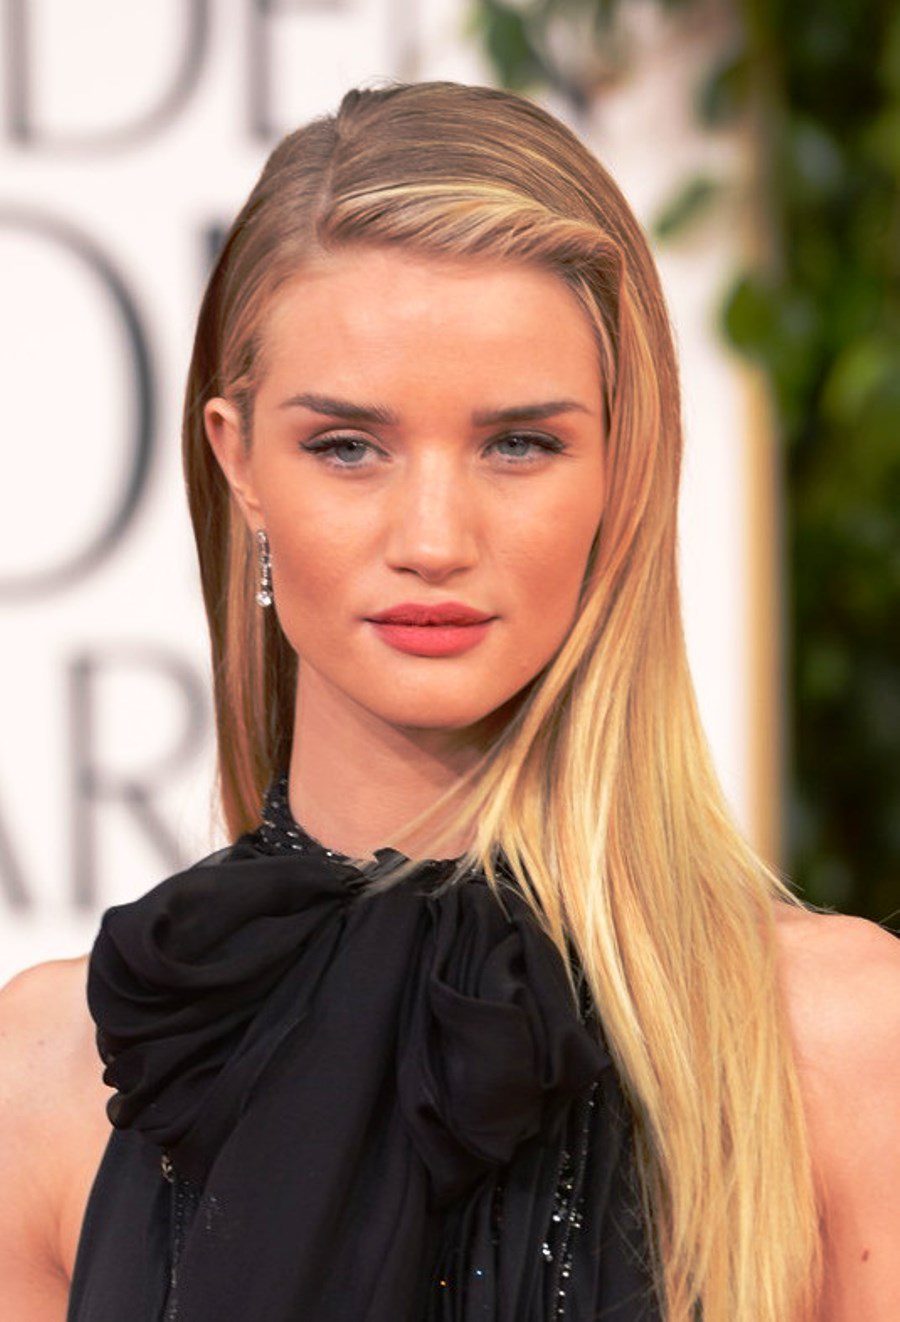 Rosie Huntington Whiteley Deep Side Parted Long Blonde Hairstyle 2013